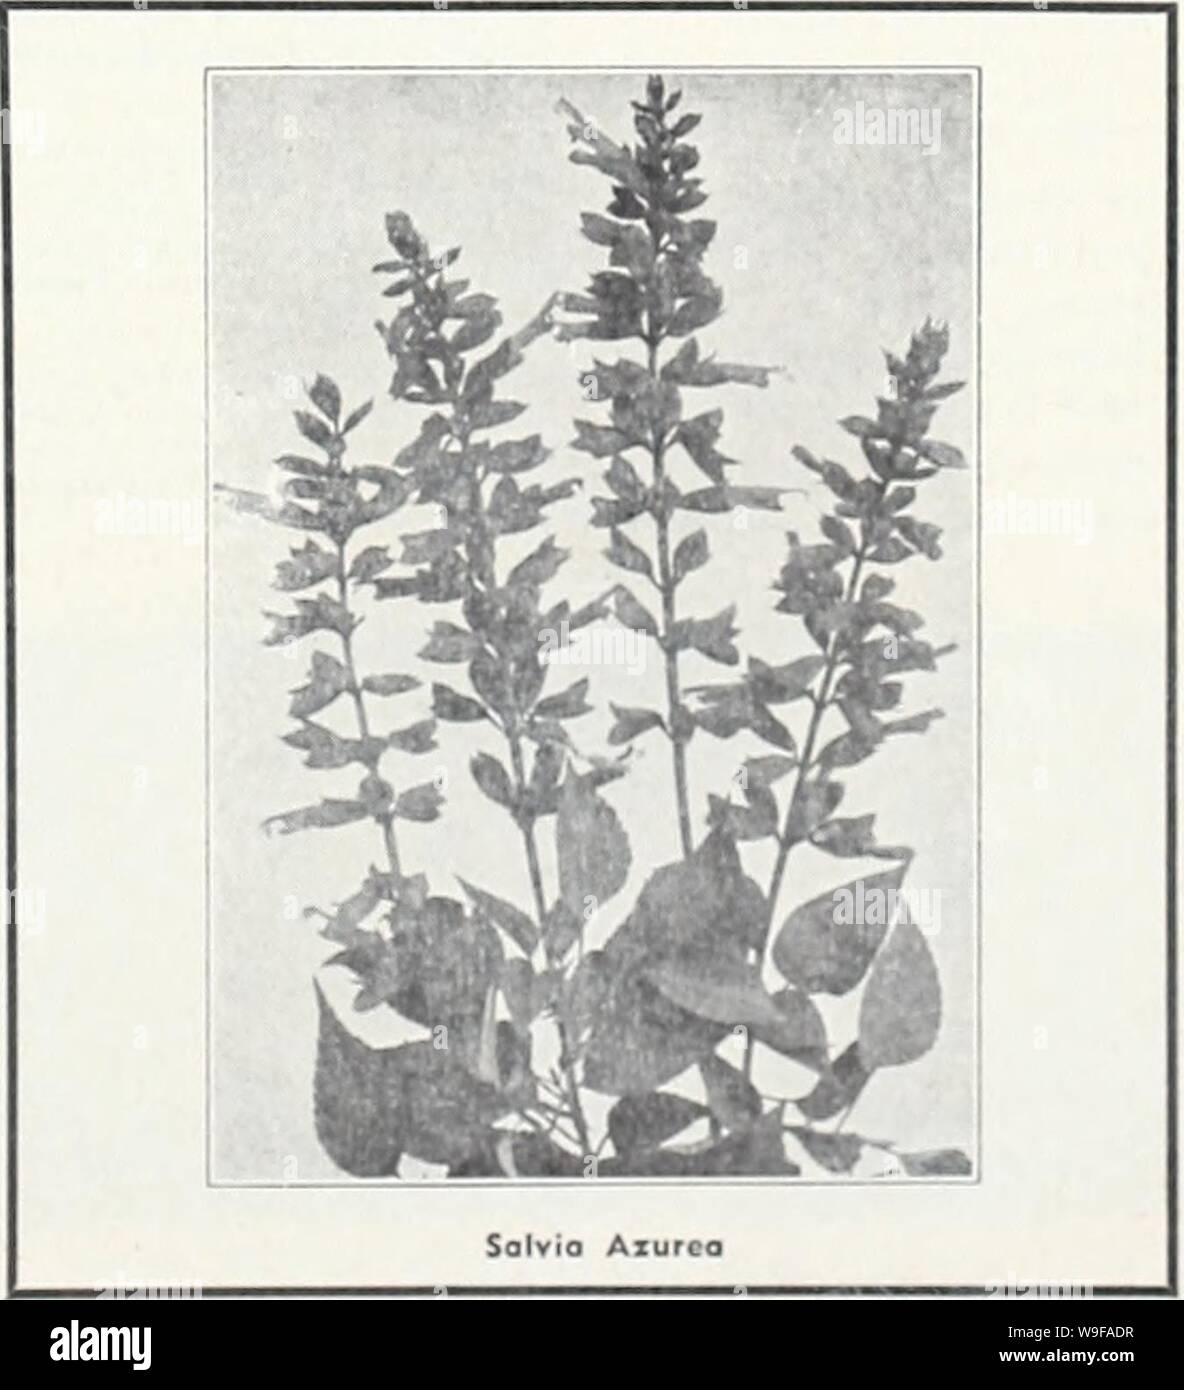 Archive image from page 26 of Currie's 65th year garden annual. Currie's 65th year garden annual  curries65thyearg19curr Year: 1940 ( -TiTOH SILENE (Catchfly) PENDULA COMPACTA — Dworf, hardy perennial, pretty pink flowers; 6'. Pkt., 10c. SCHAFTA (Autumn Catchfly) — Masses of bright pink flowers from July to October. Plants, 25e; seeds, Pkt., 15c. ALPESTRIS—Dwarf rock plant, 4' high, pure white flowers in May and June. Plants, 25e; doi., $2.50. STATIC E (Sea Lavender) LATIFOLIA—Tufts of leathery leaves, large heads of purplish- blue flowers. Plants, 25c; doi., $2.50; seeds, Pkt., 10c. DUMOSA De Stock Photo